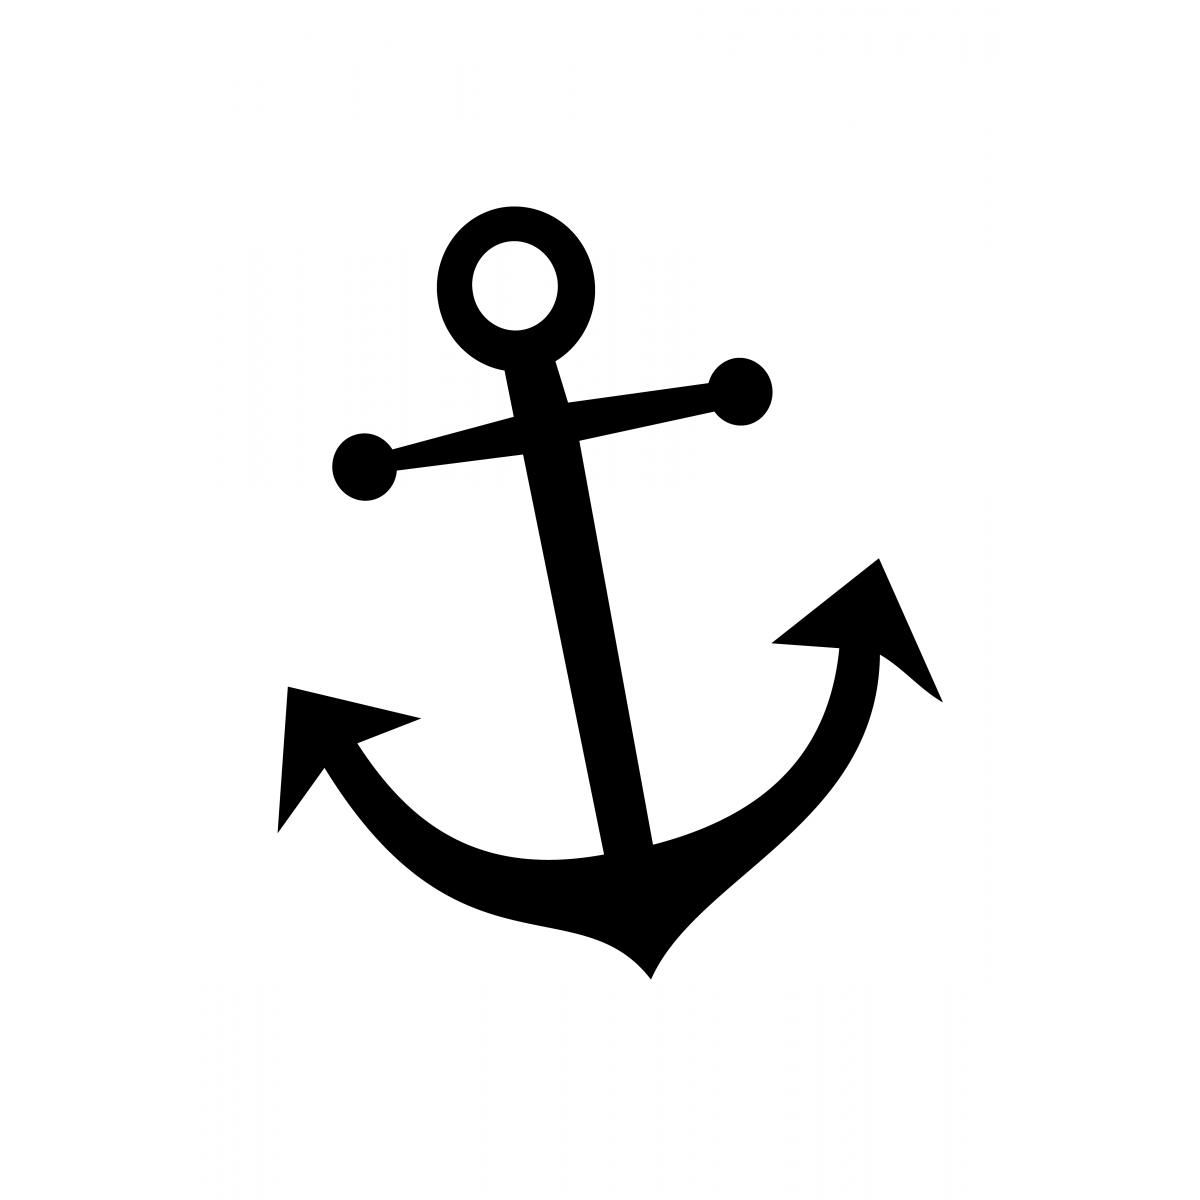 Free Anchor Silhouette Png, Download Free Clip Art, Free